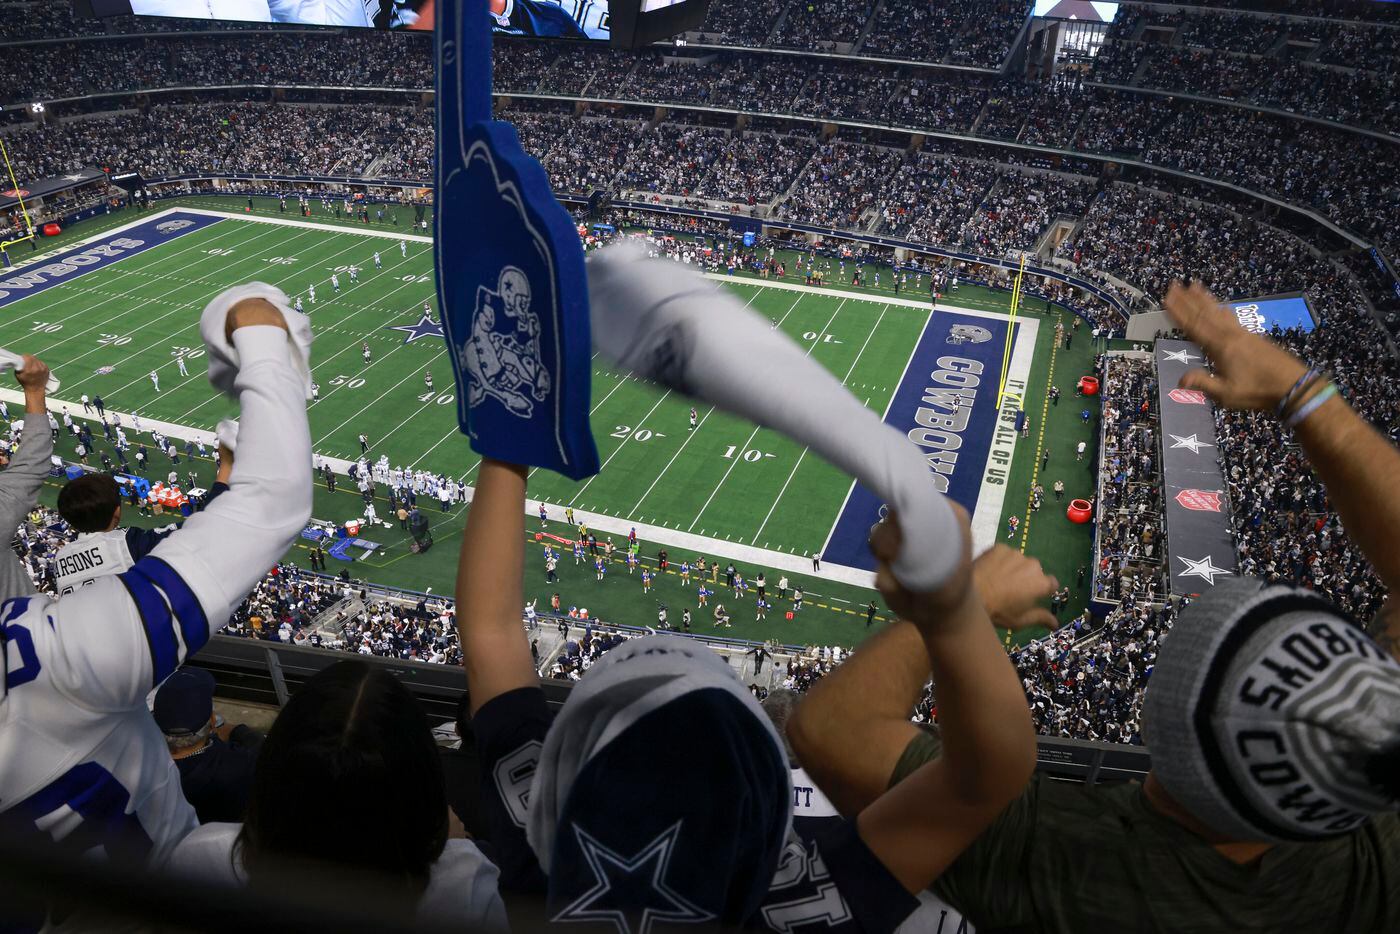 Dallas Cowboys fans cheer as Dallas lines up to kick after scoring and taking the lead in...